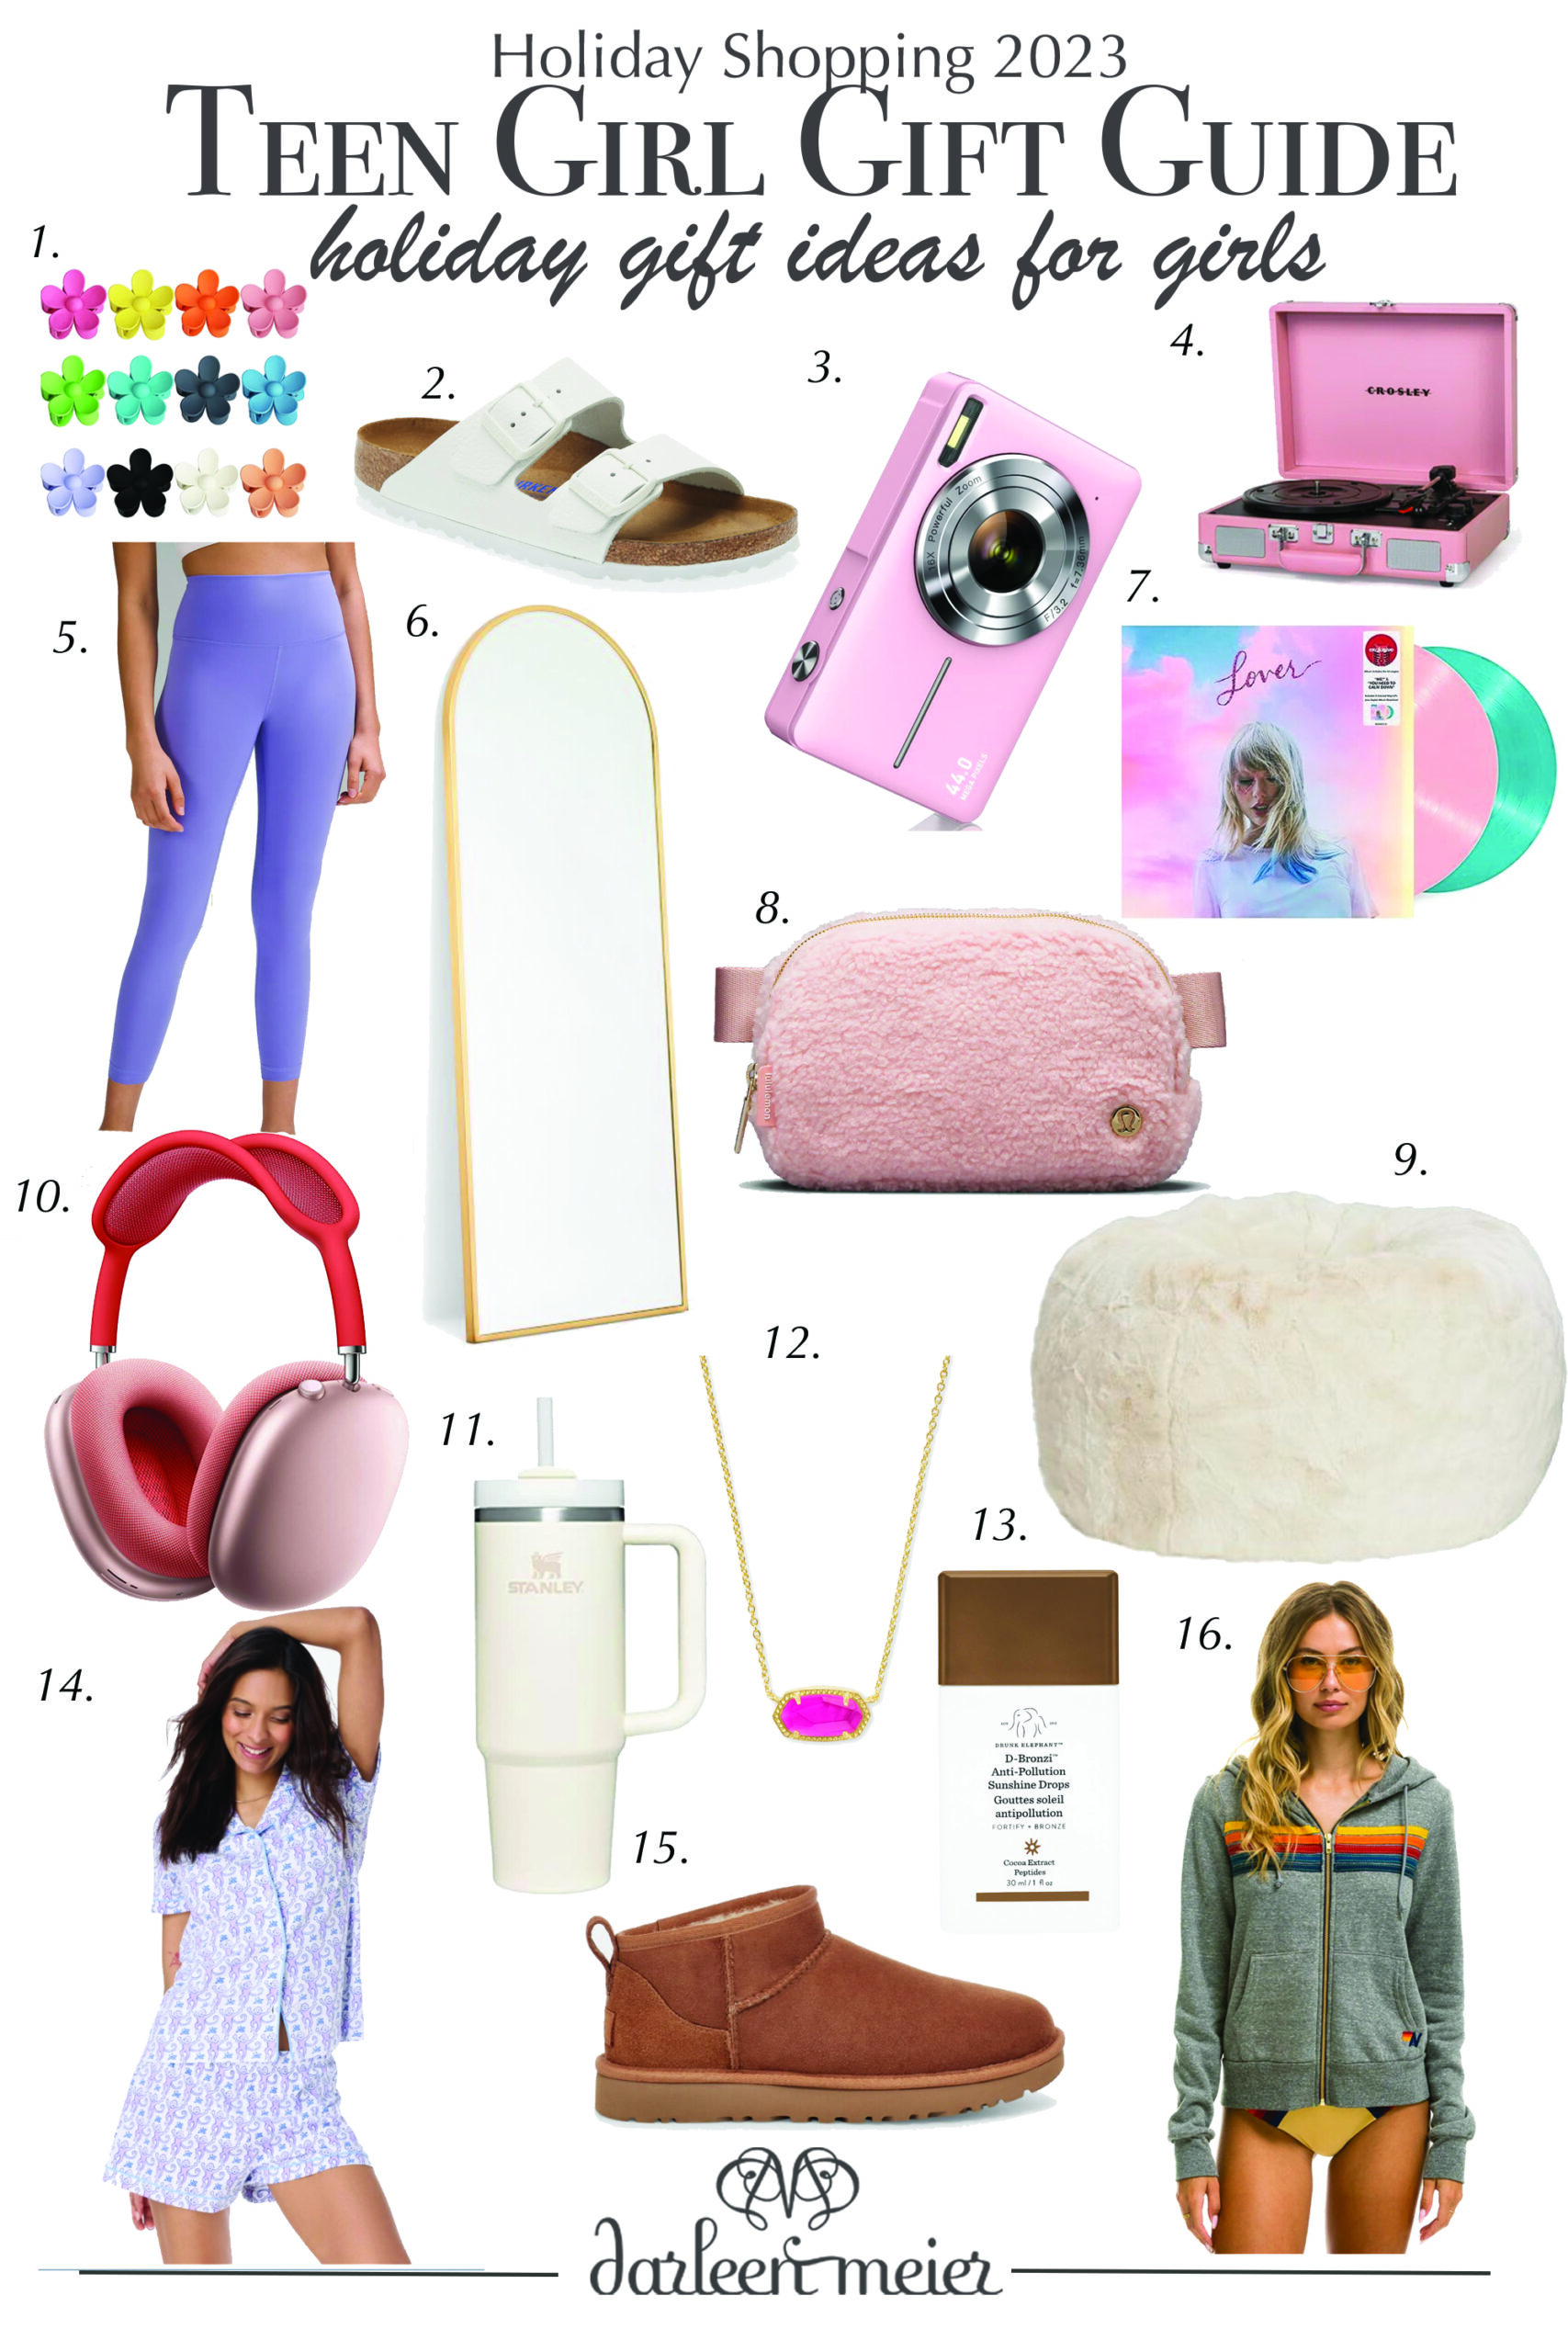 Best gifts for teenage girls in 2023, according to teenage girls